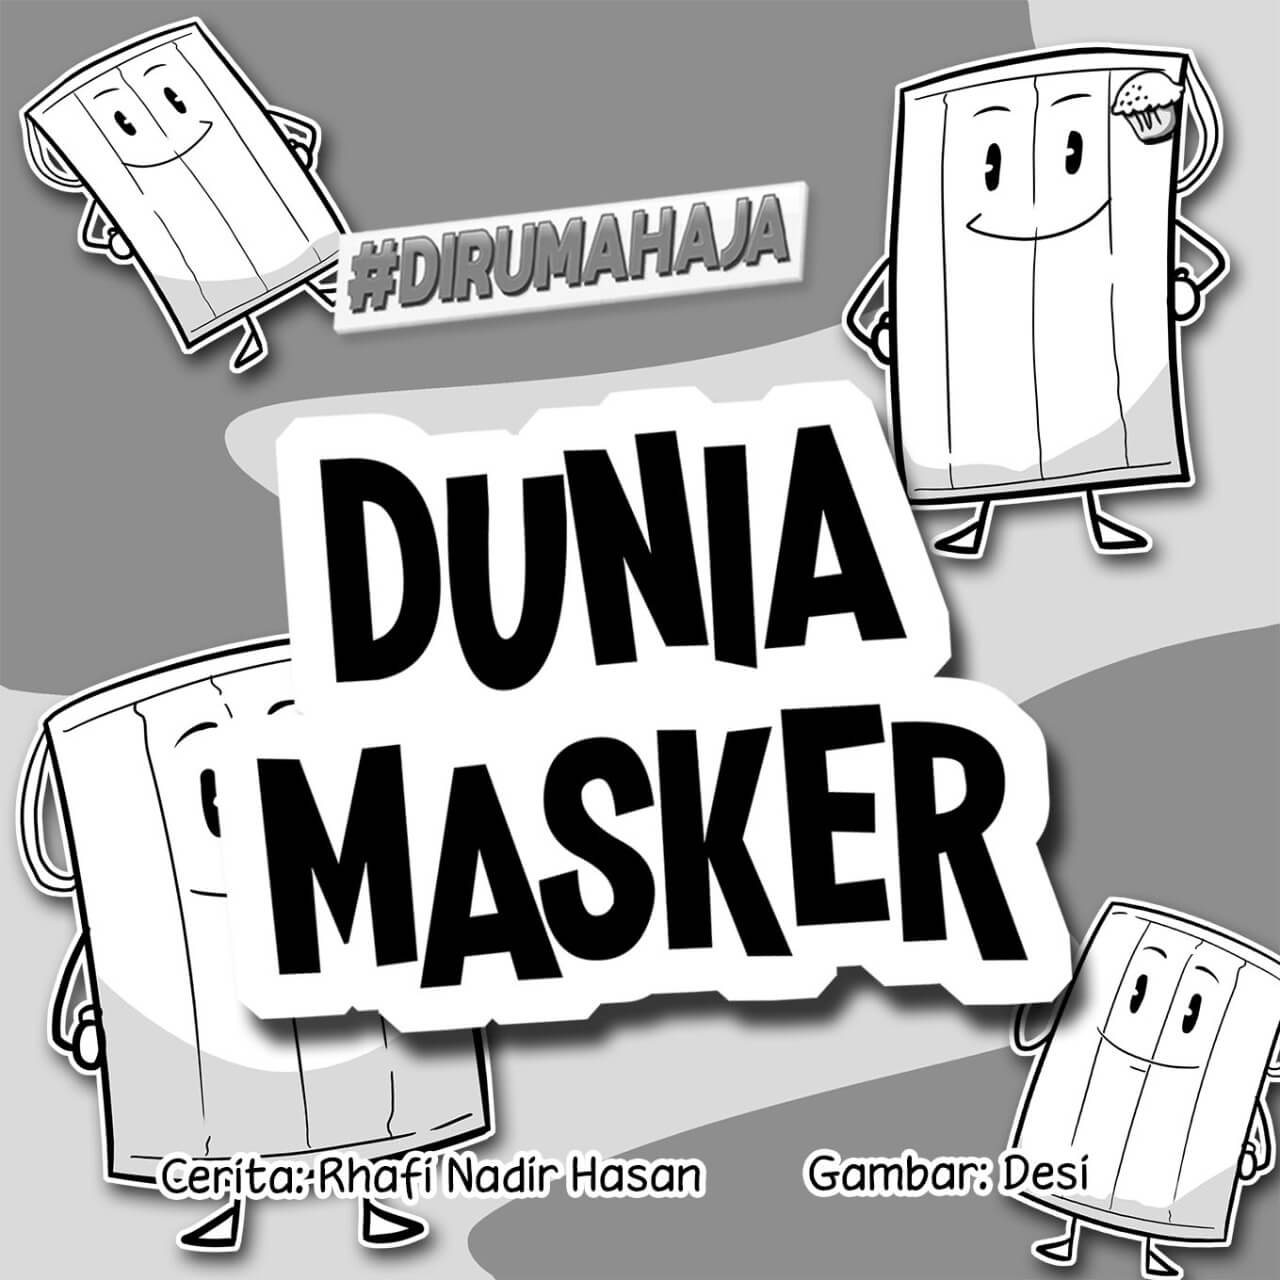 Dunia Masker cover bw